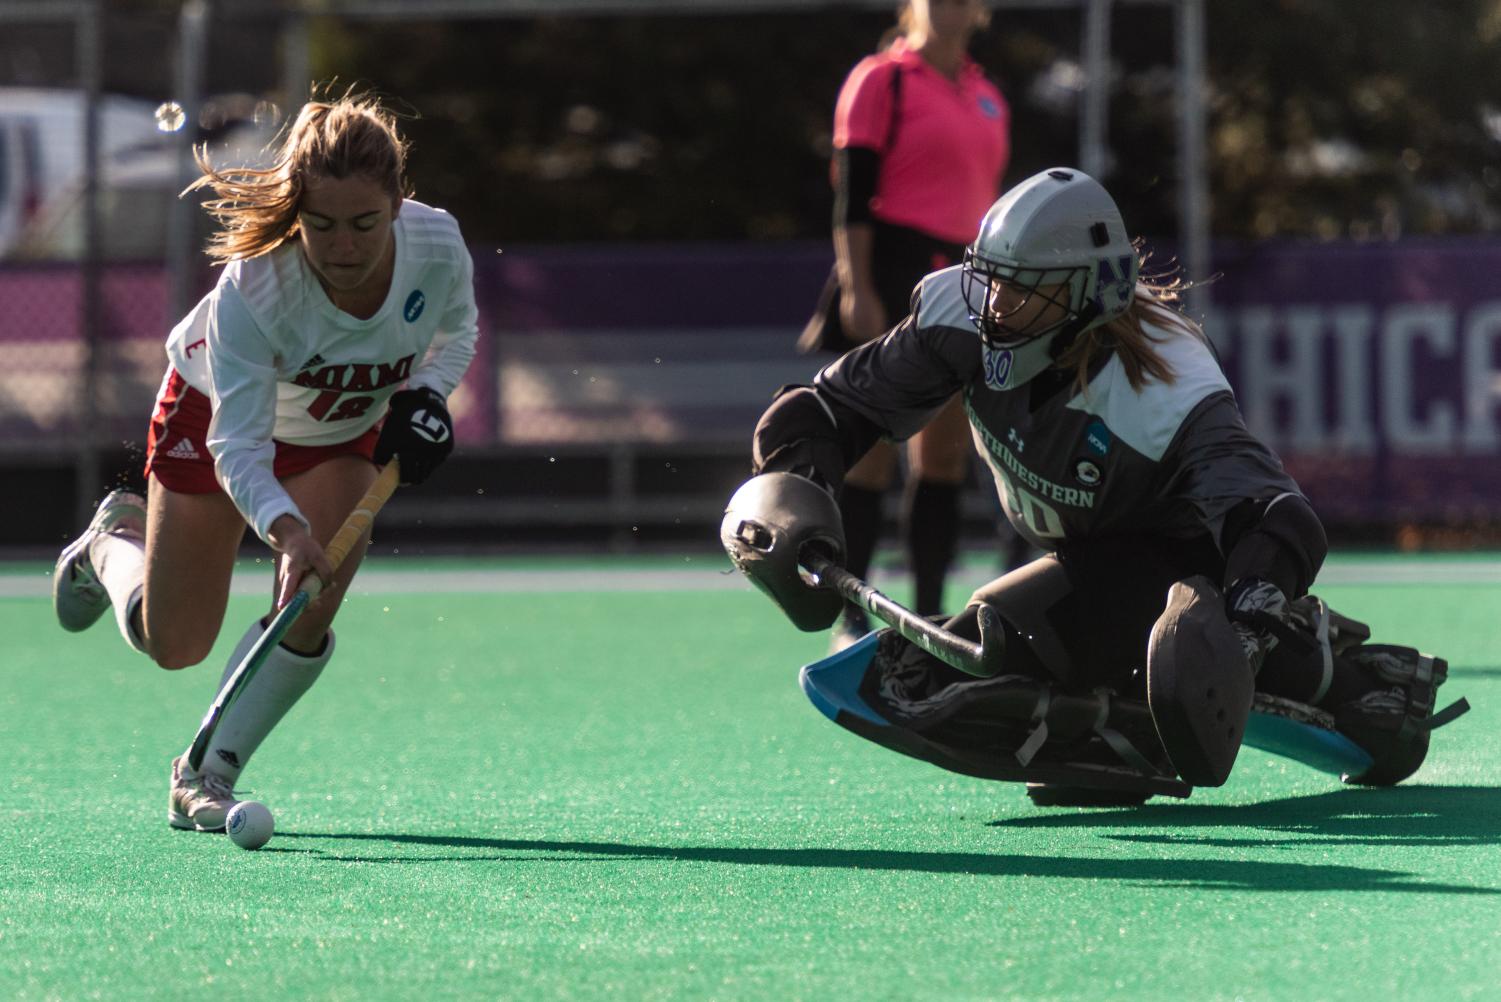 A field hockey goalie is down on their knees to defend a goal being scored from a ball being hit by a player in a white jersey.